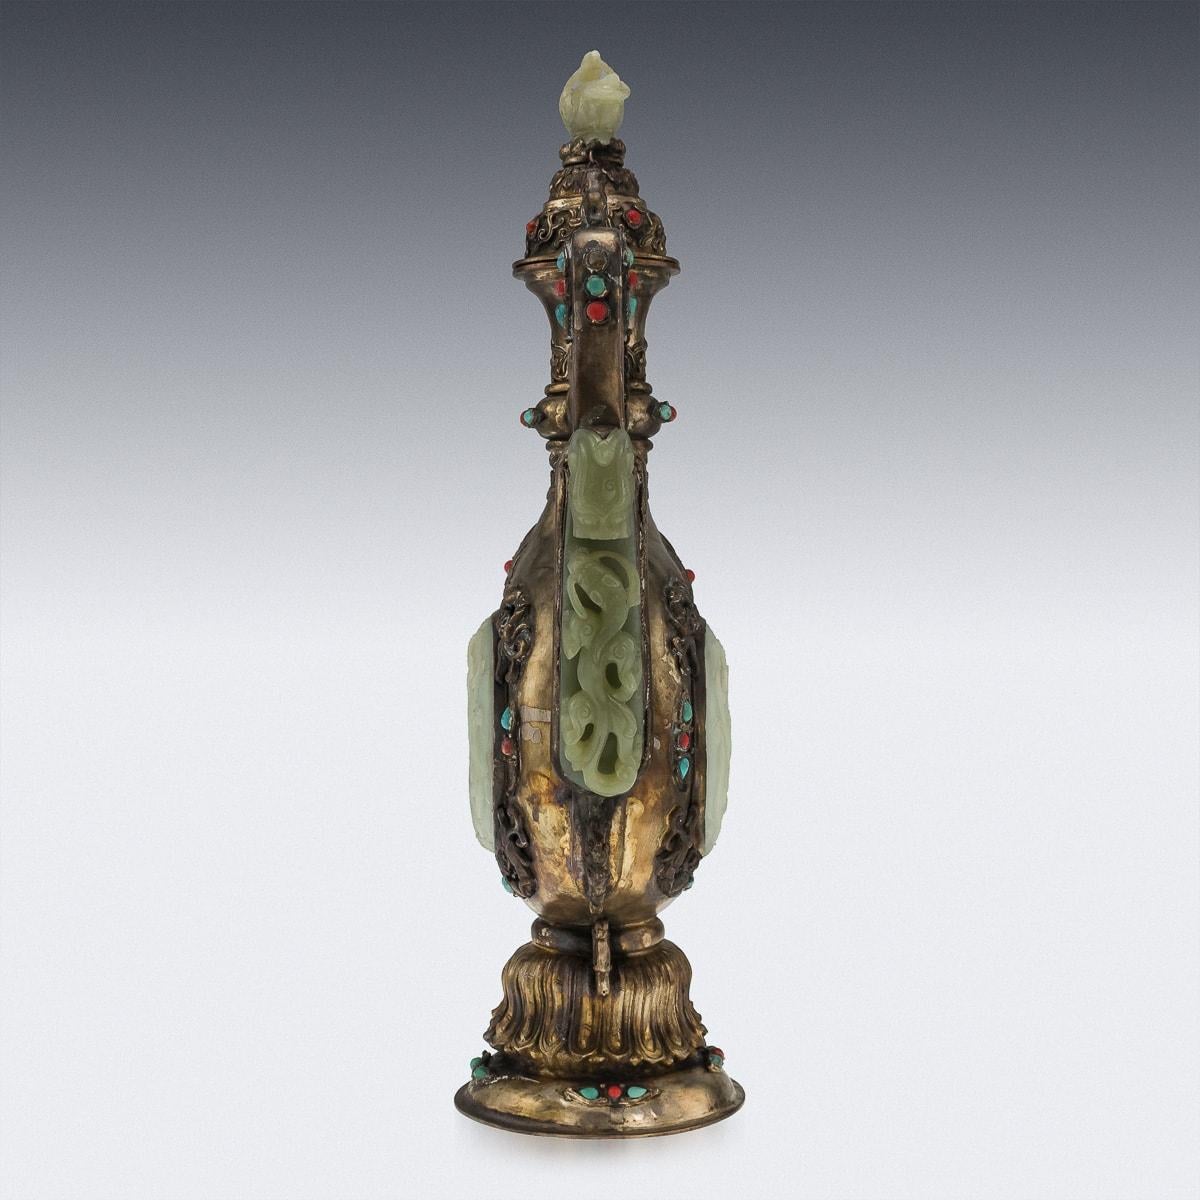 Antique 19th century Mongolian-style hardstone and jade-inlaid gilt metal ewer, the pear-shaped body embellished with corals, turquoises and lapislazuli, the large handle mounted with a jade 